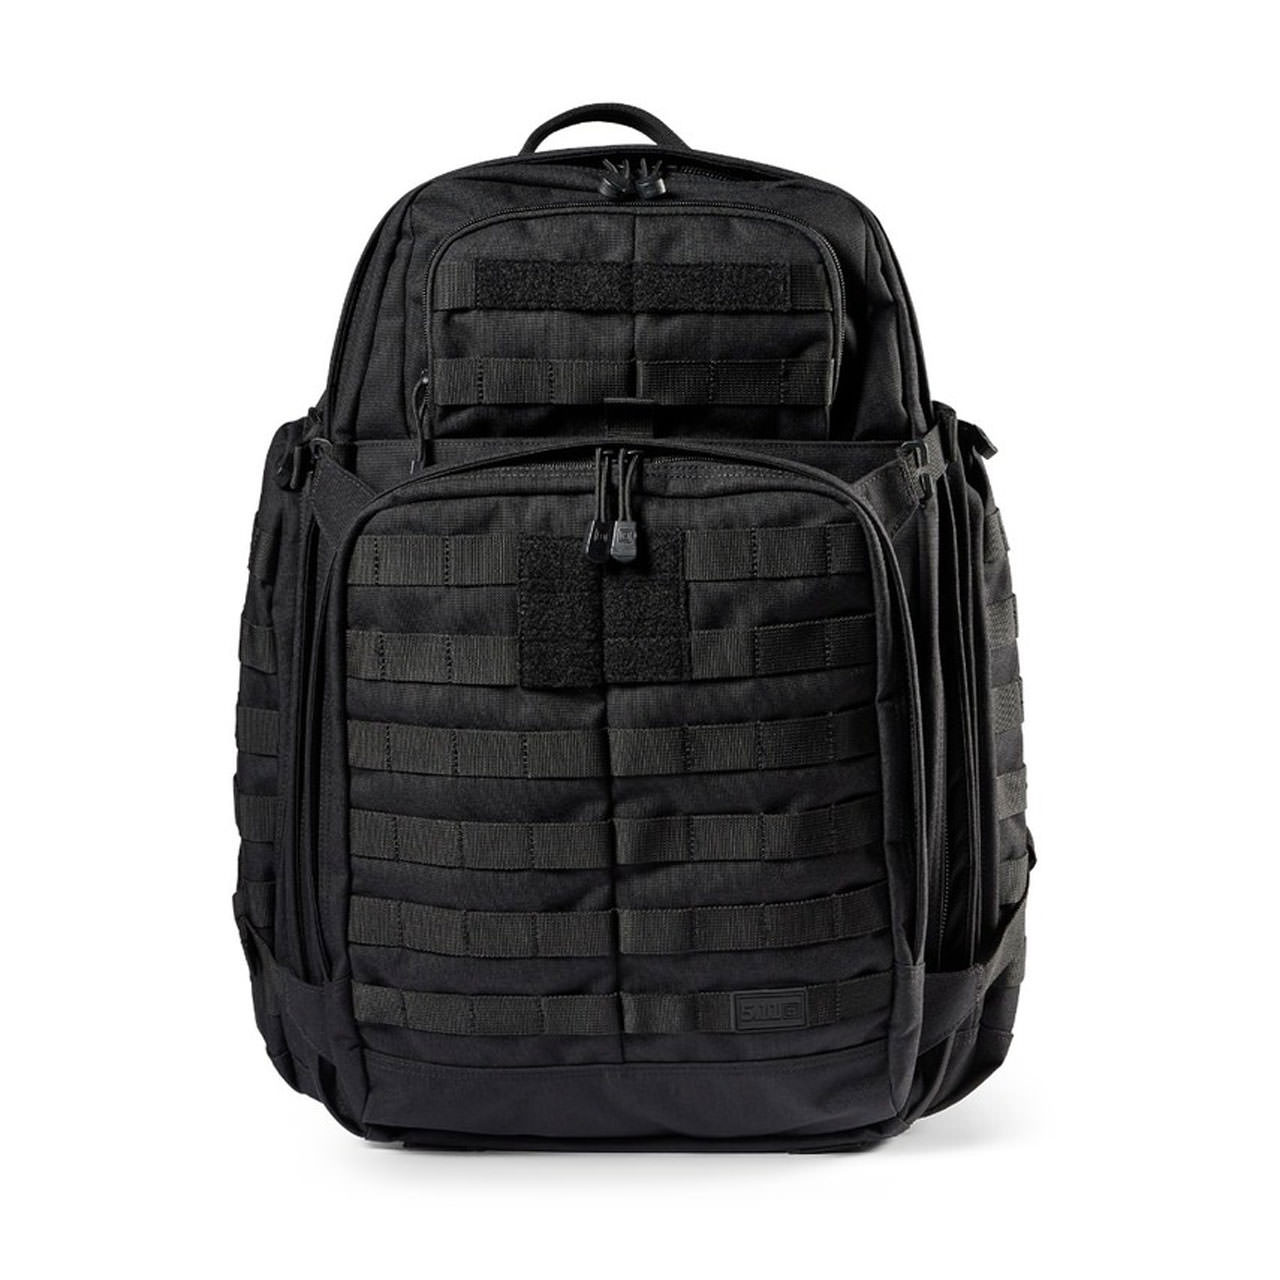 5.11 Tactical What's New